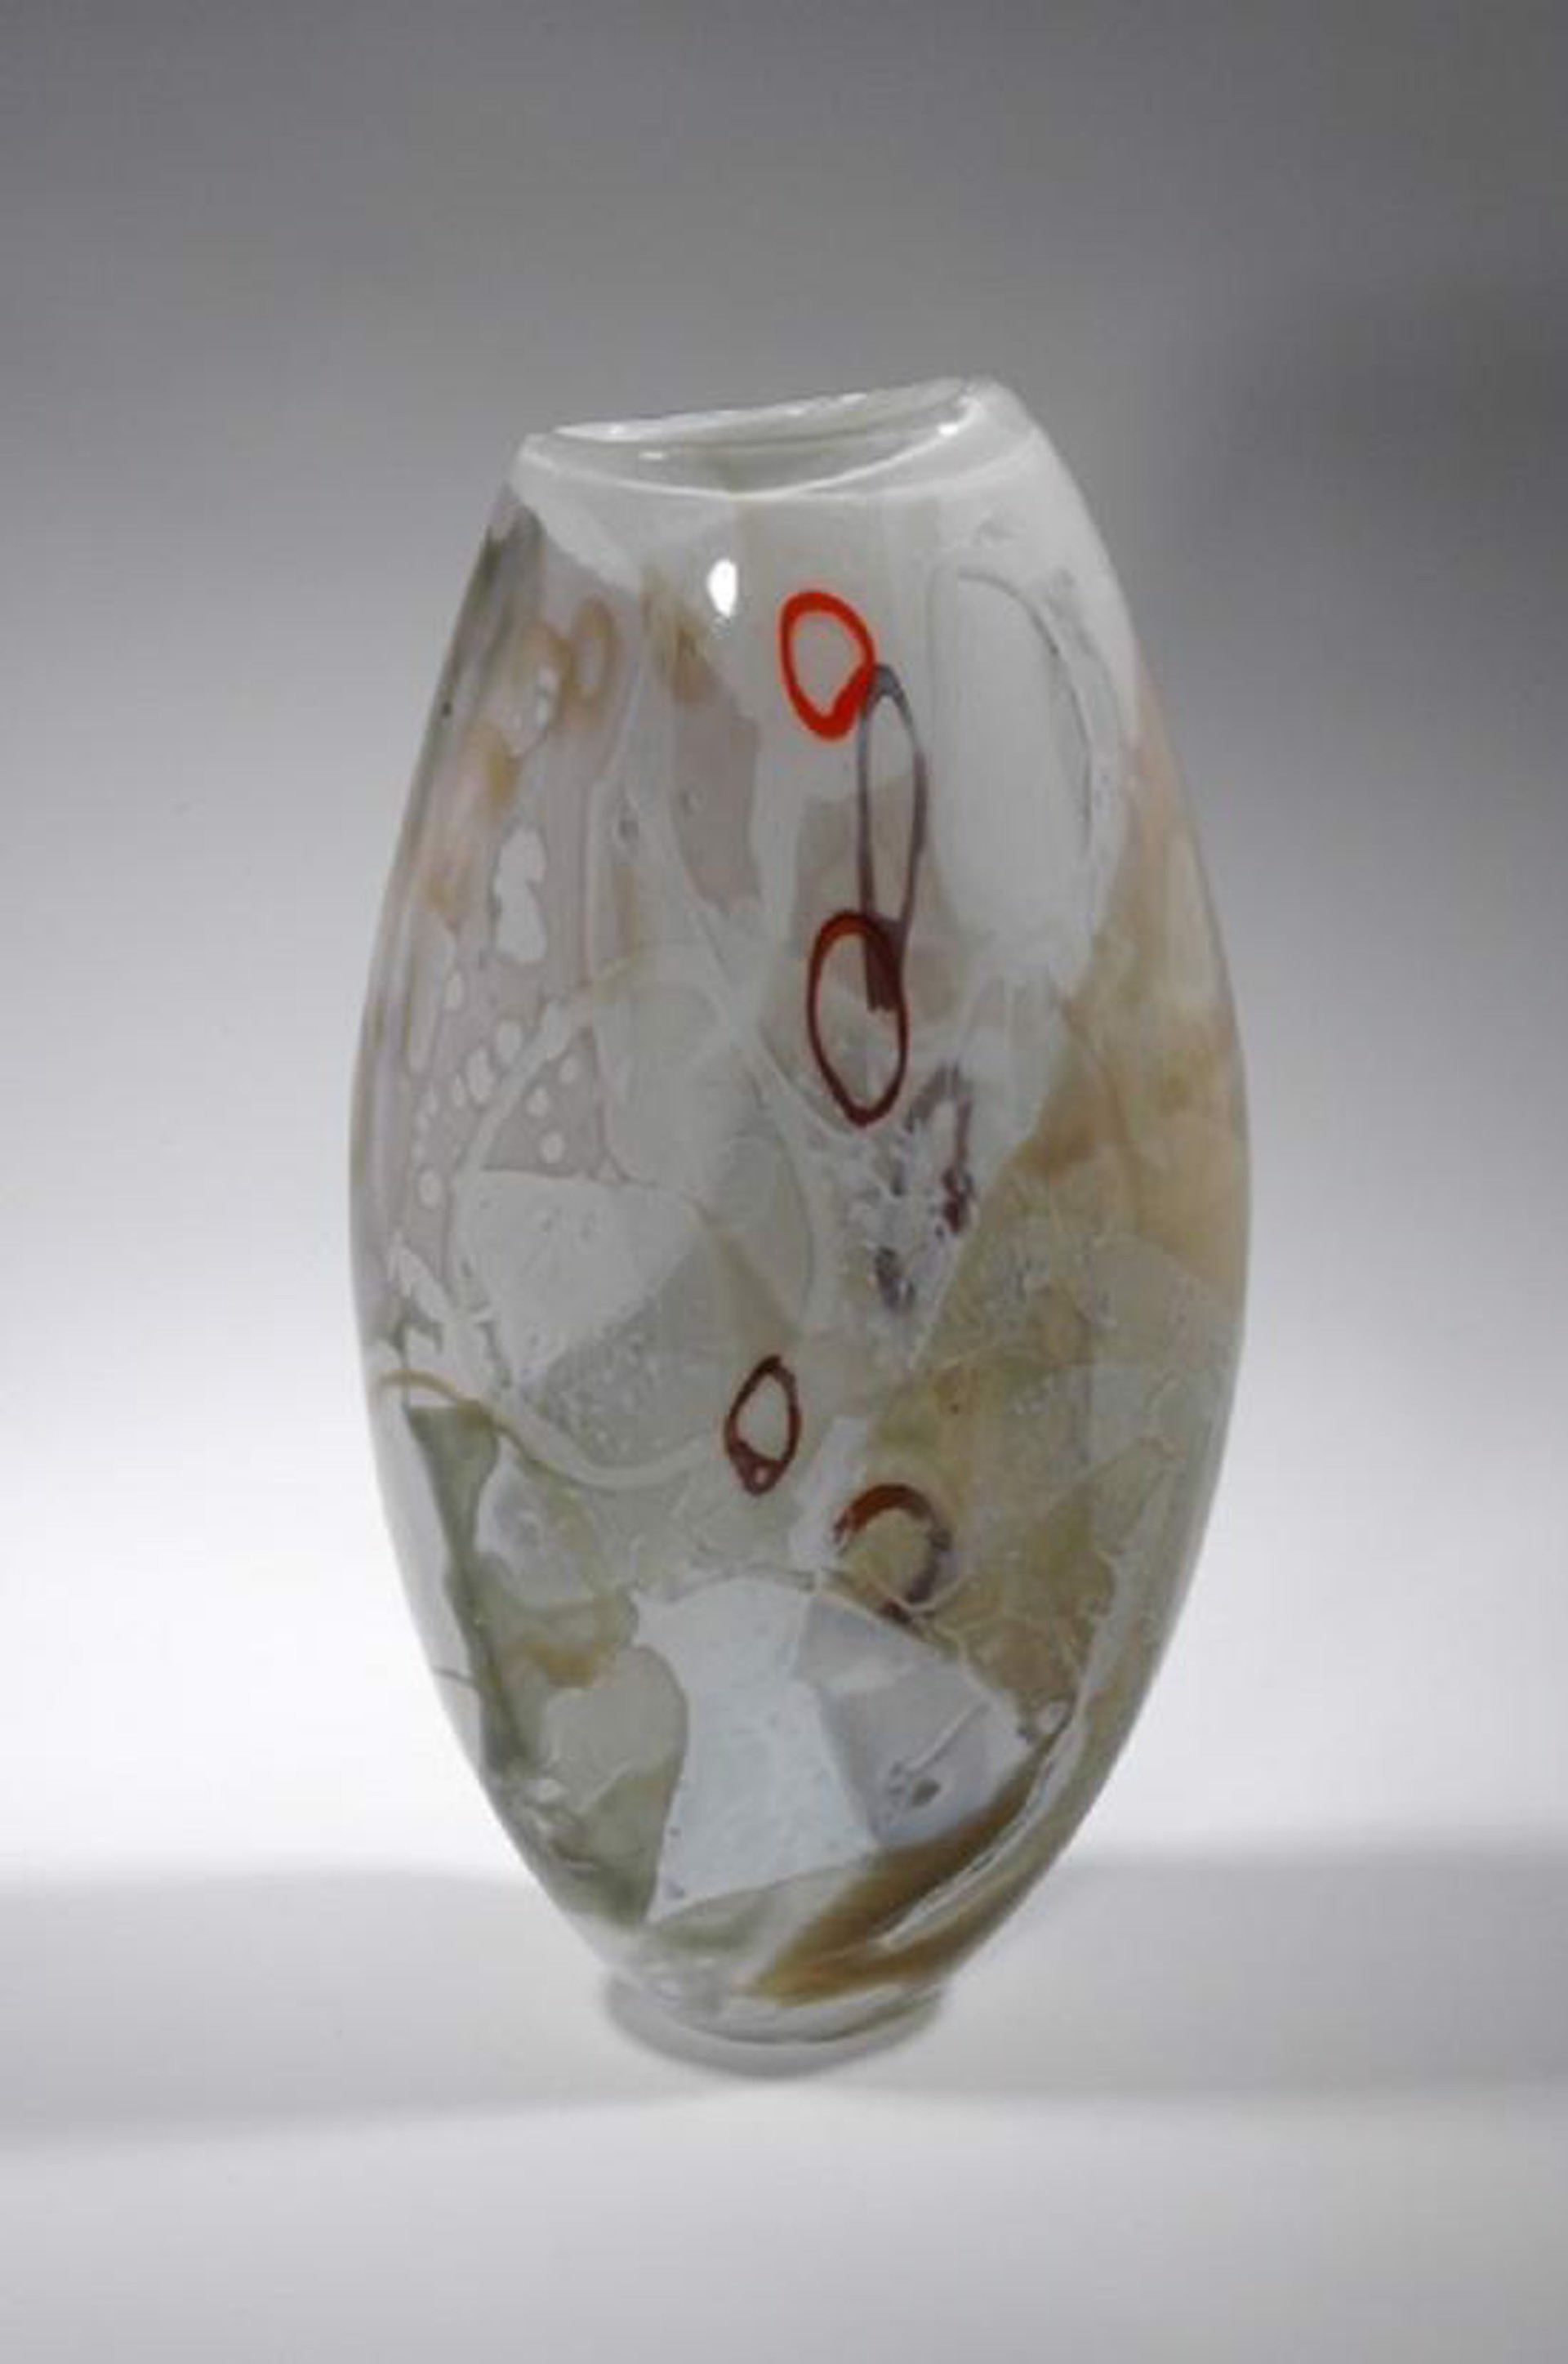 Shard Vase - Open Form with Red O by Susan Rankin